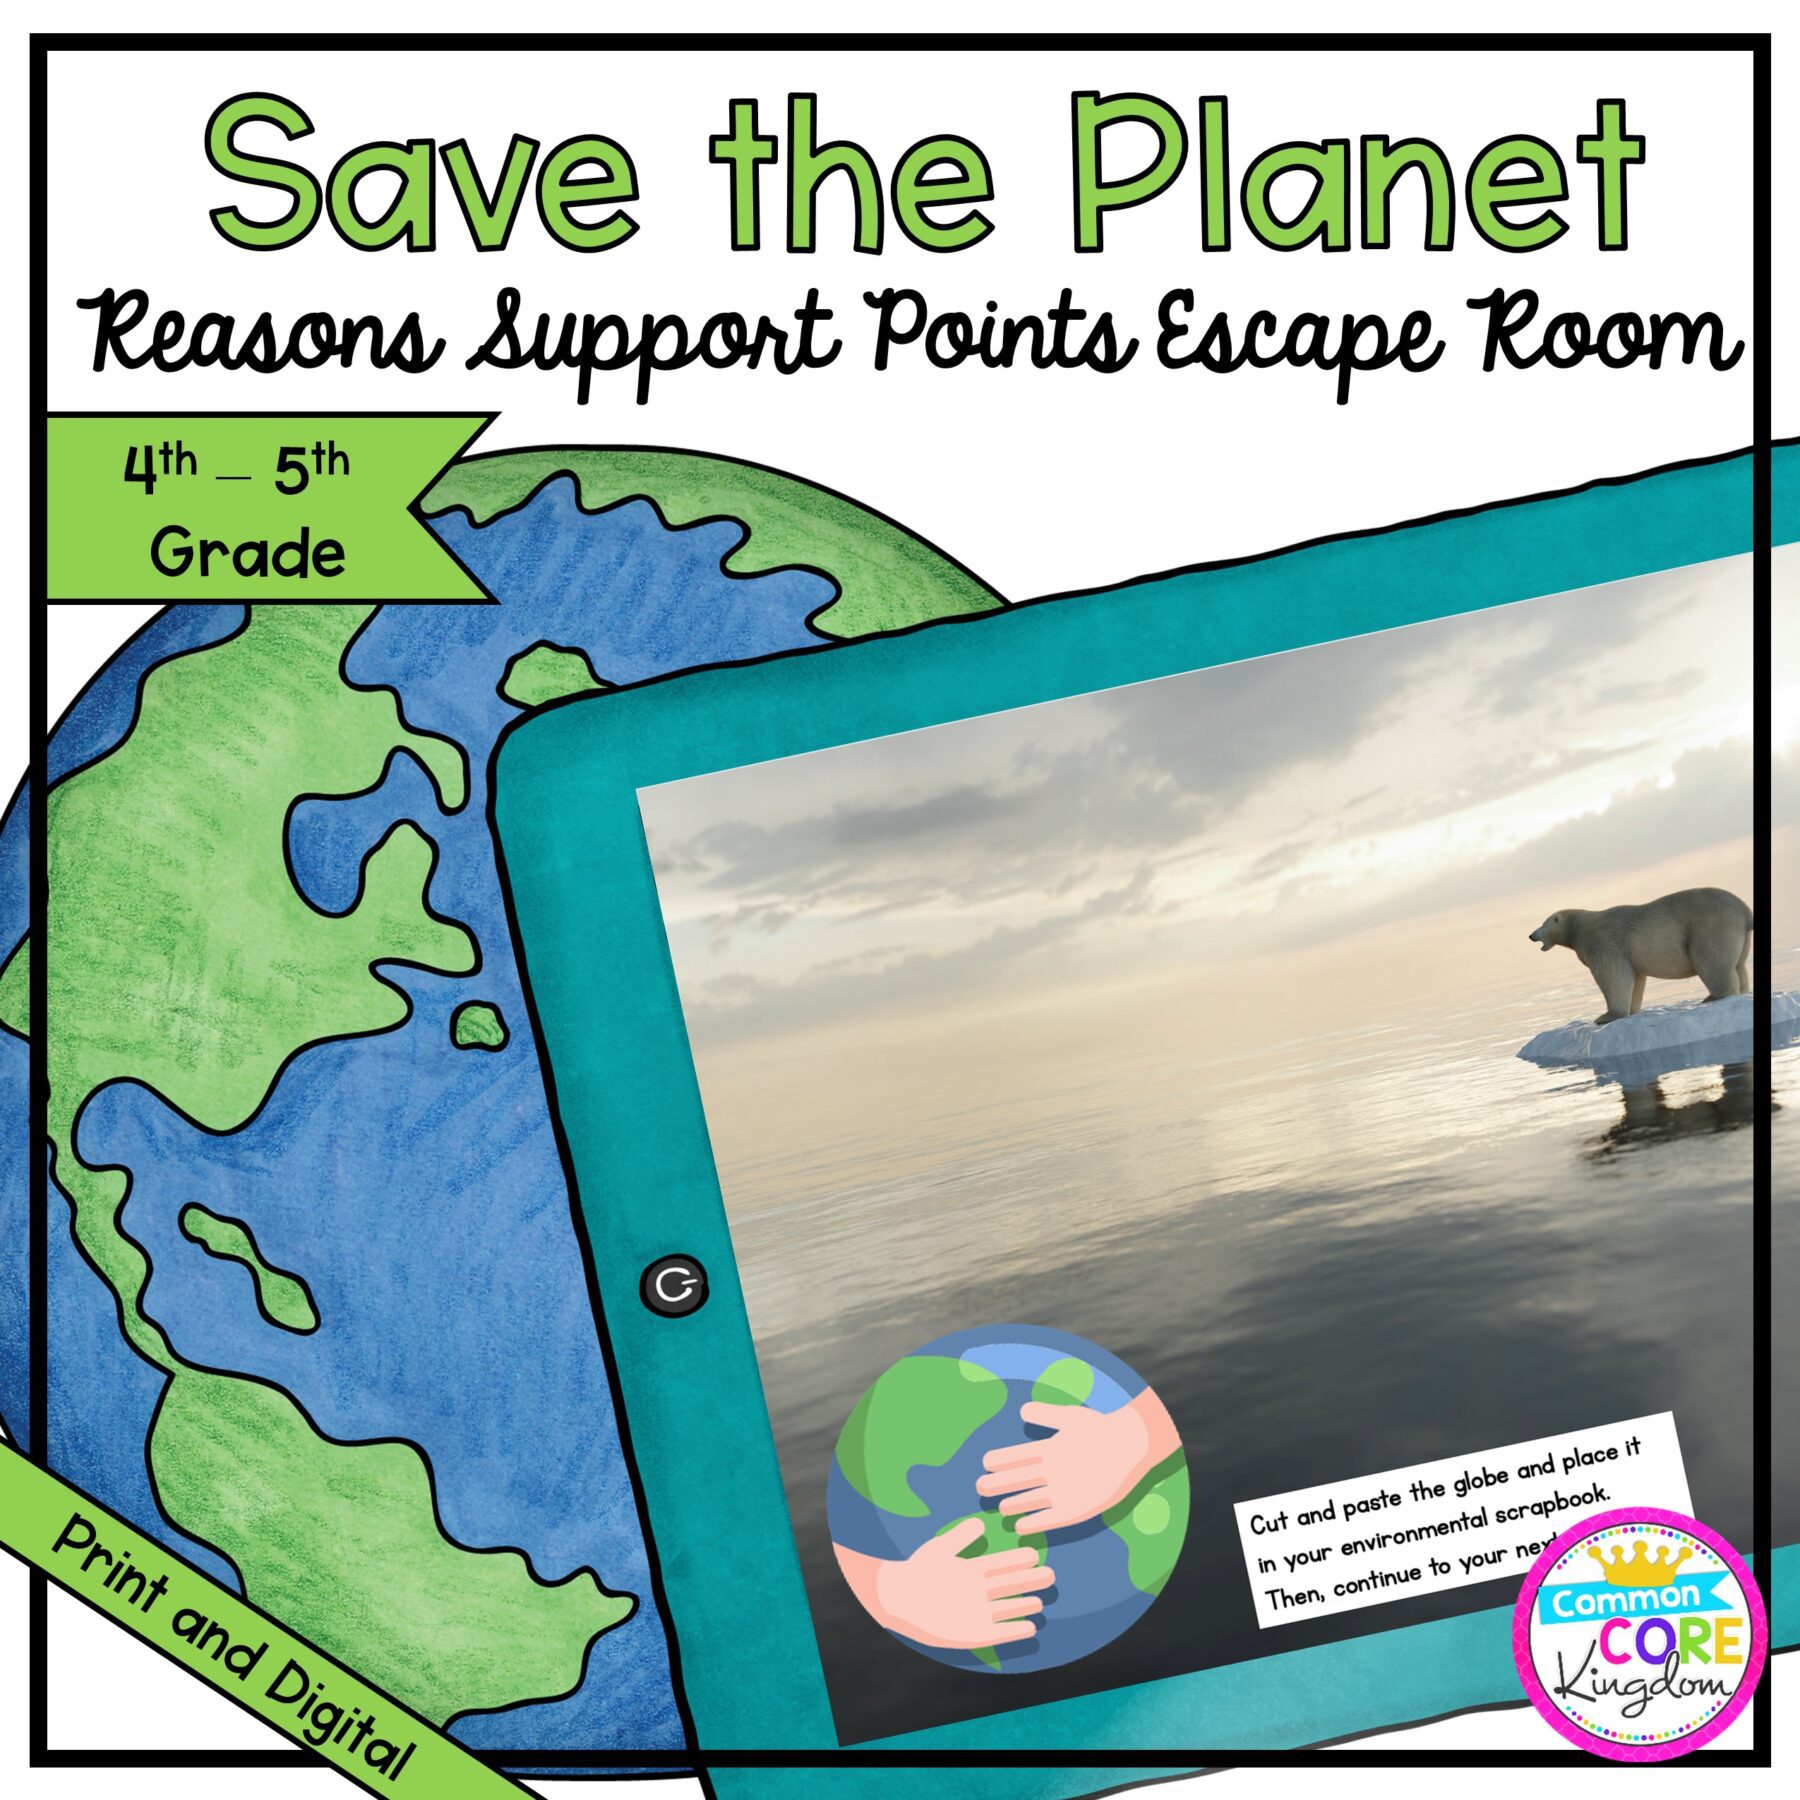 Save the Planet Reasons Support Escape Room for 4th & 5th Grade in Google Slides & Printable Format